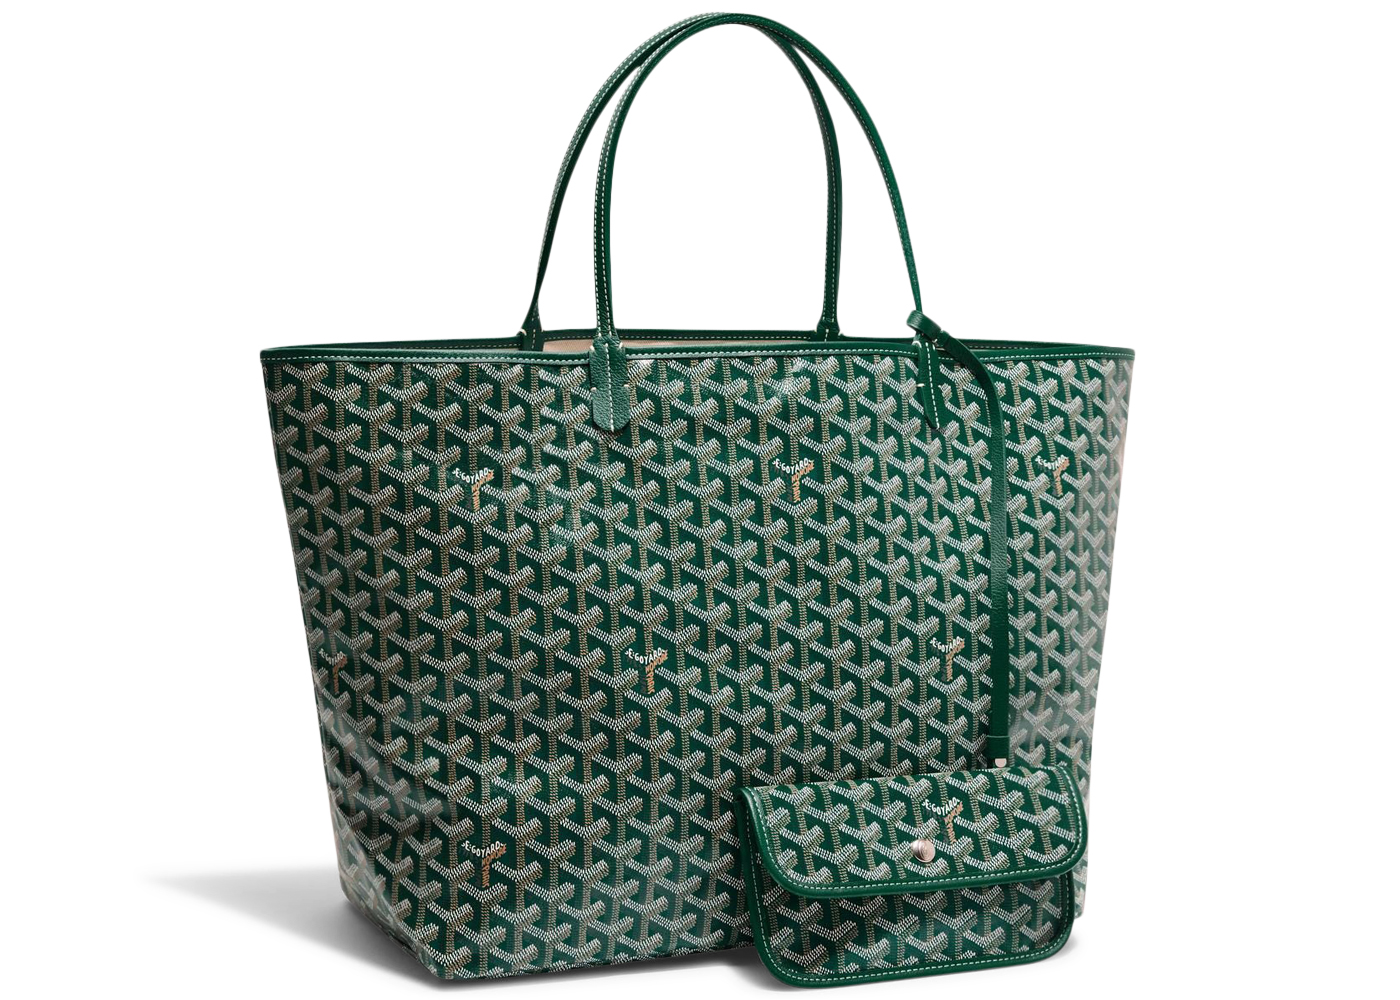 Your Guide to the Top 5 Goyard Bags | Handbags and Accessories | Sotheby's